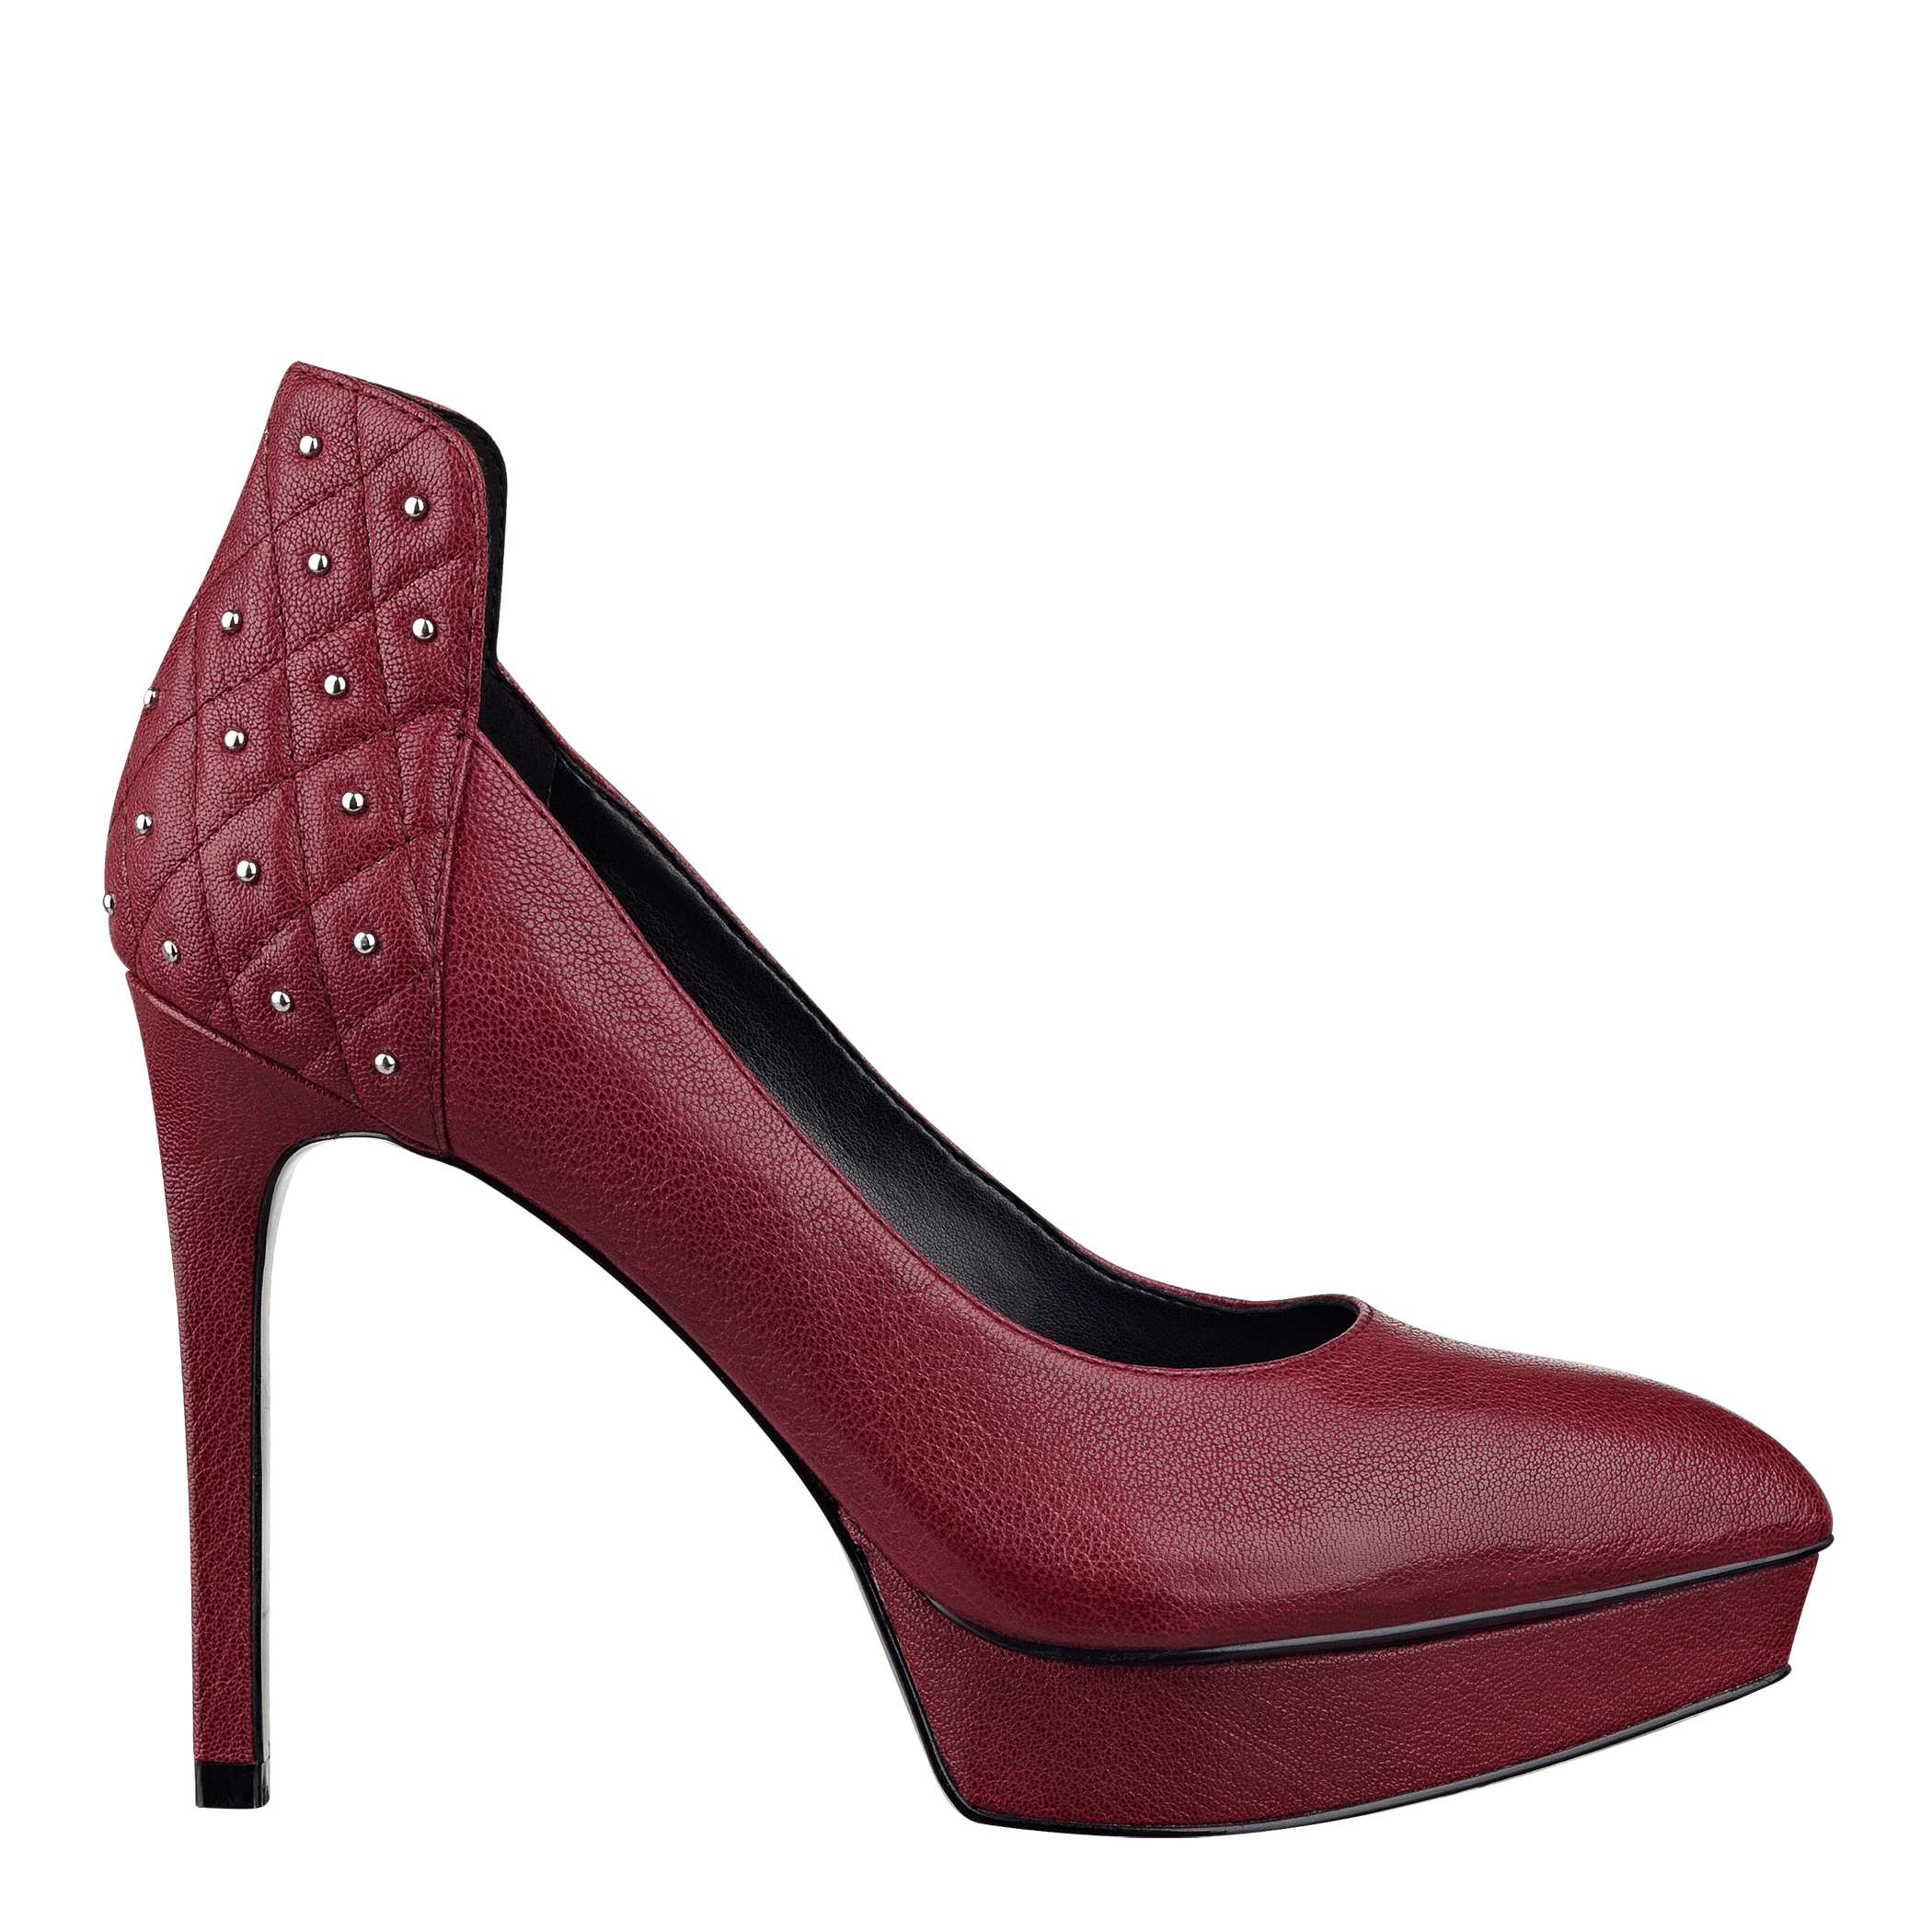 Latest Fashion of Stiletto & Heels Collection for women by Nine West(3)